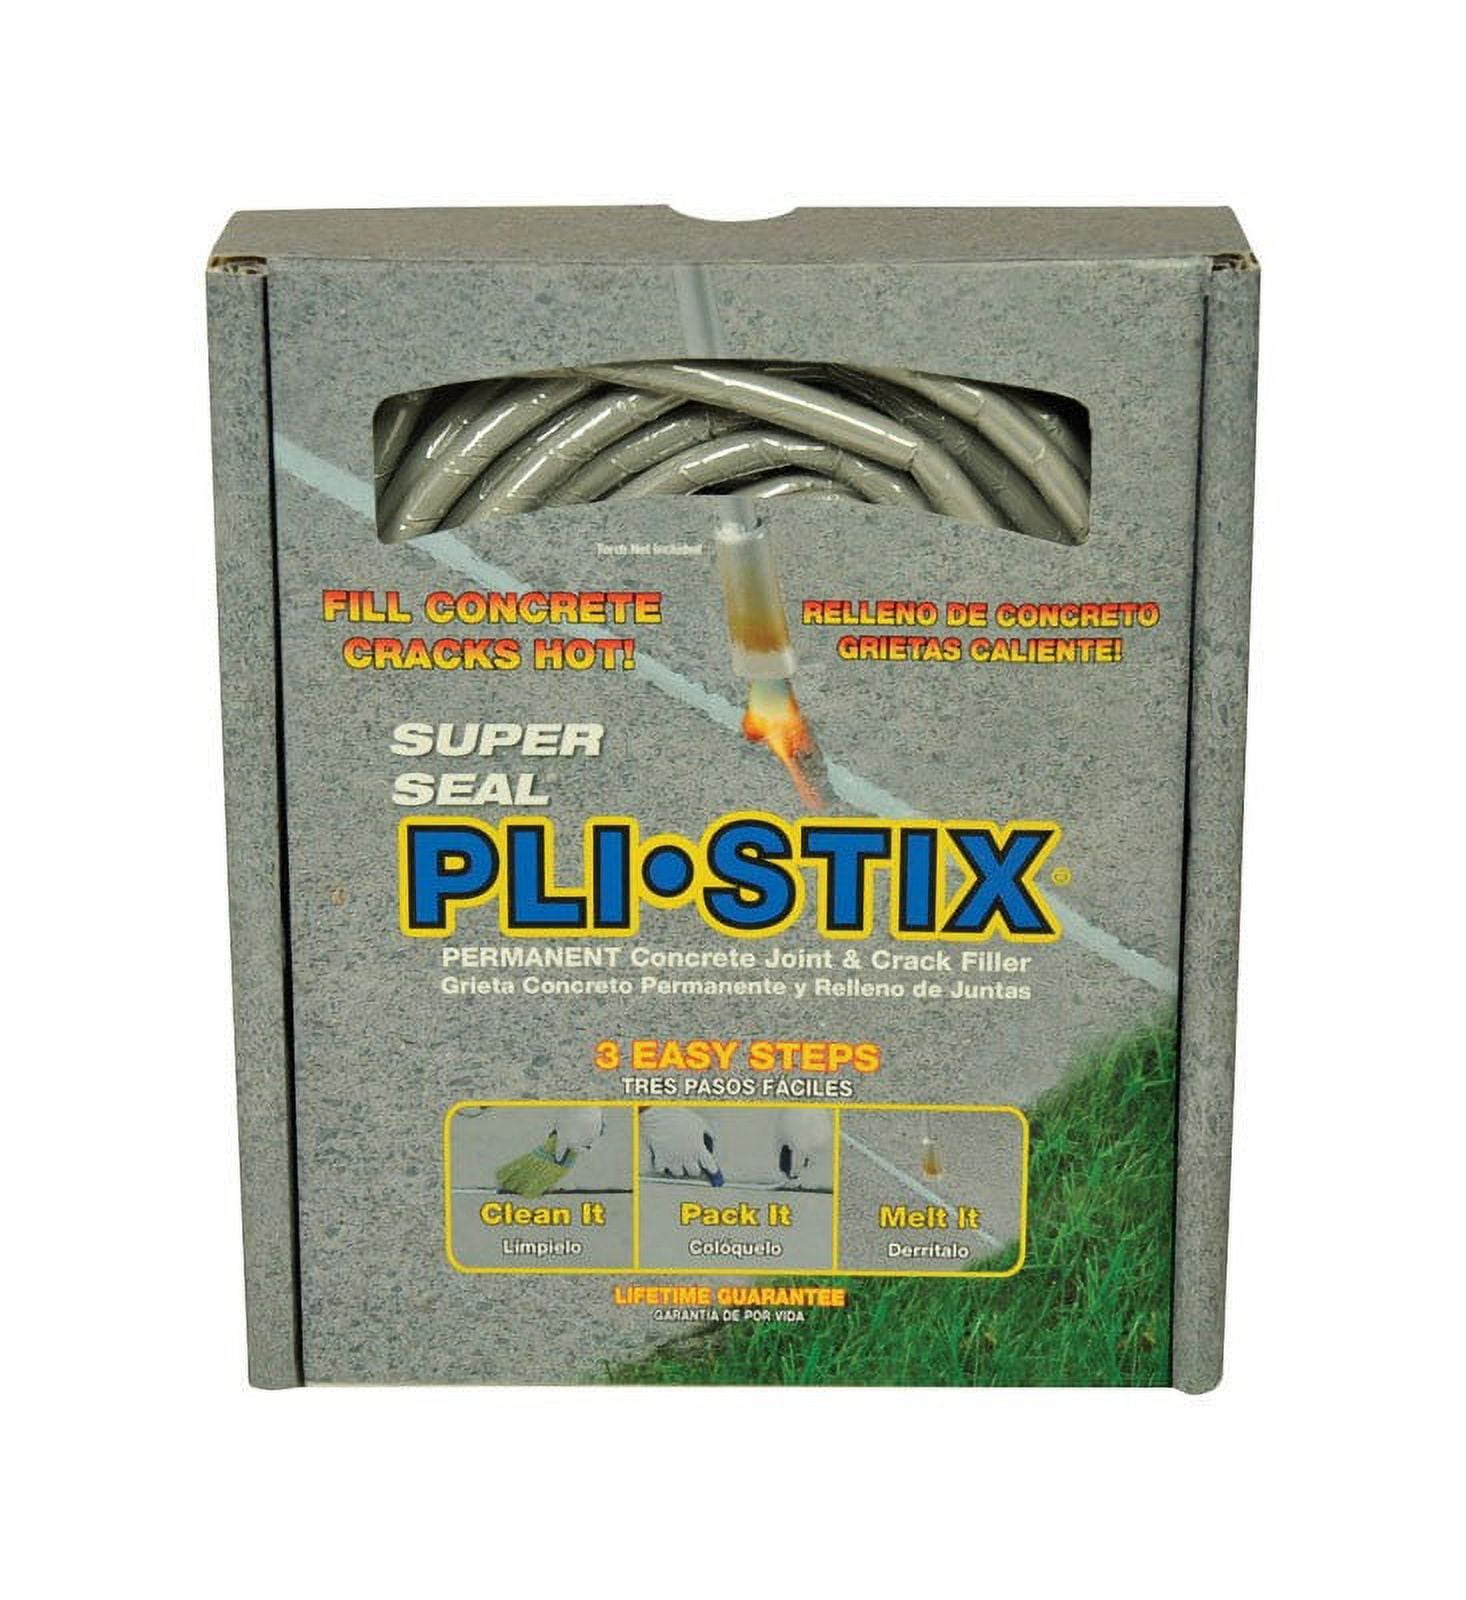 Trim-A-Slab 3/8 in. X 25 ft Grey Expansion Joint Replacement